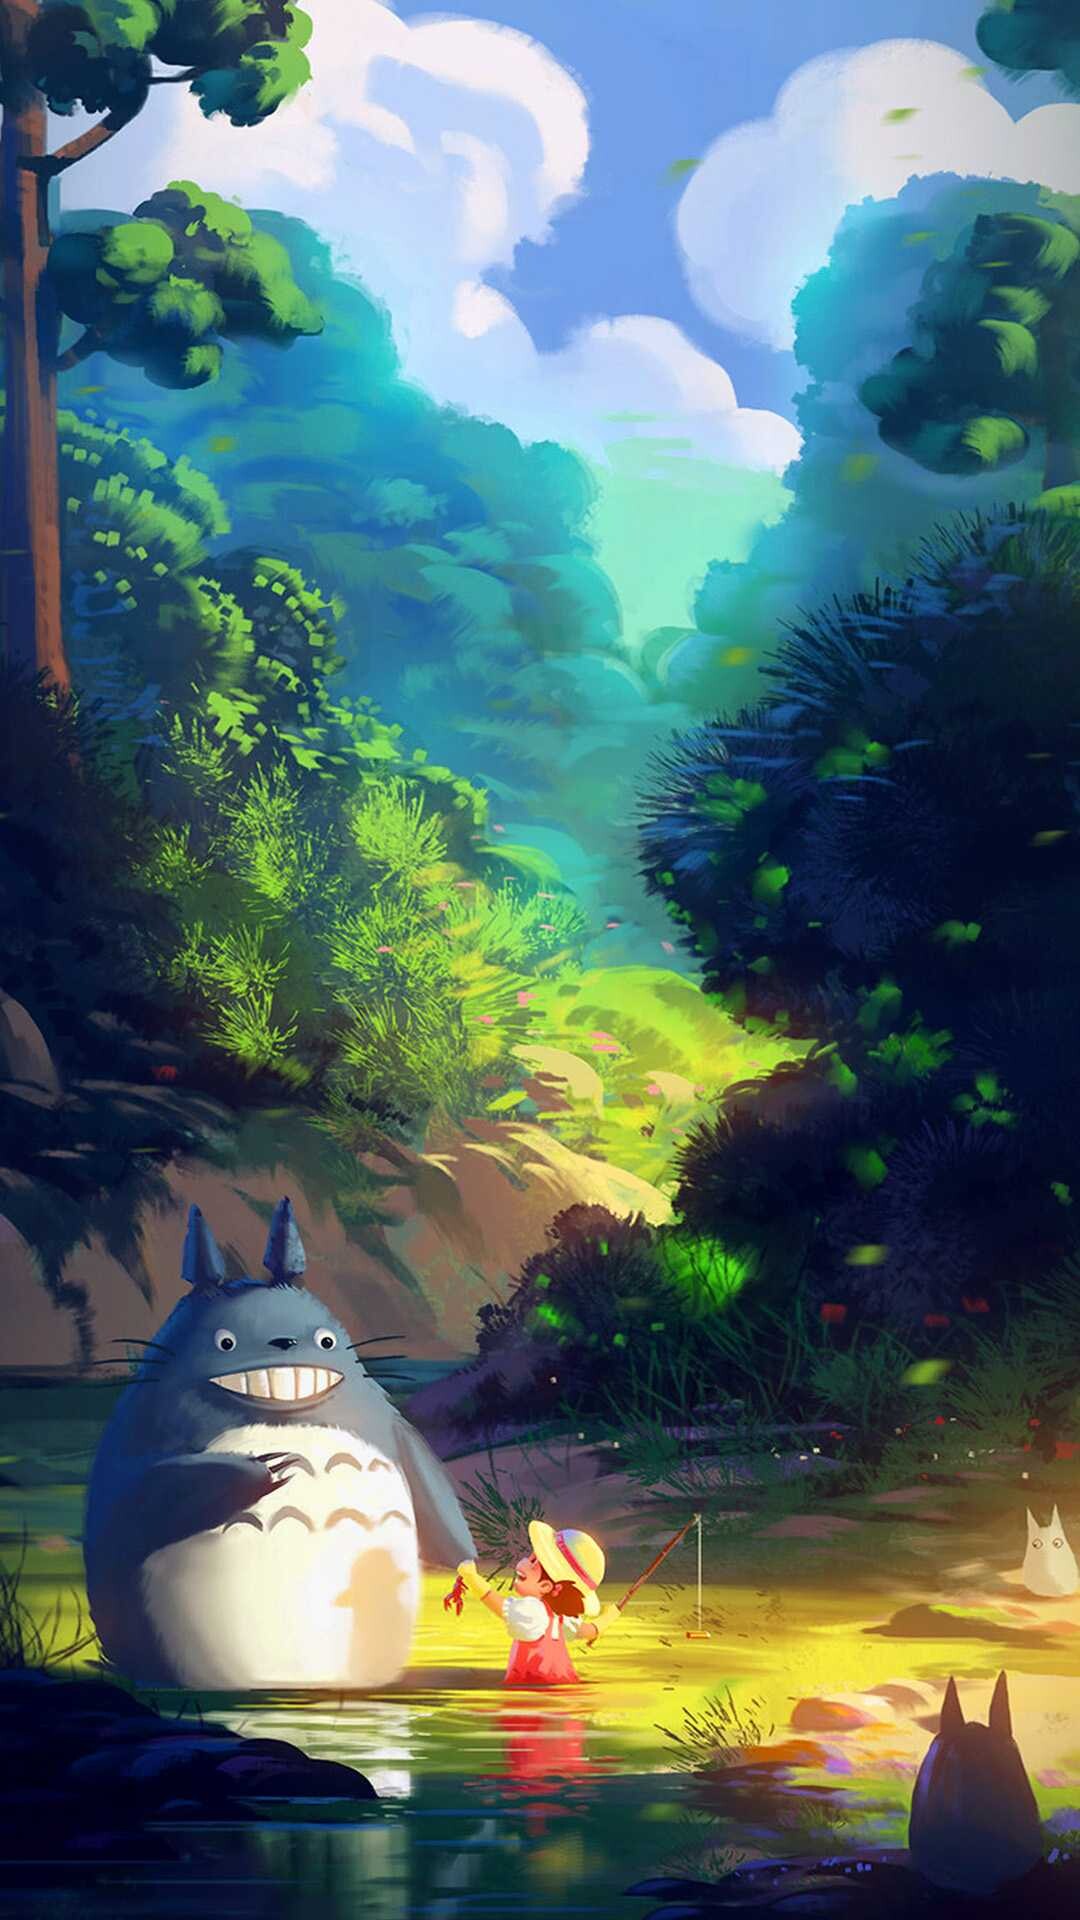 Studio Ghibli: Joe Hisaishi has become synonymous with the studio's distinctive sound and style. 1080x1920 Full HD Wallpaper.